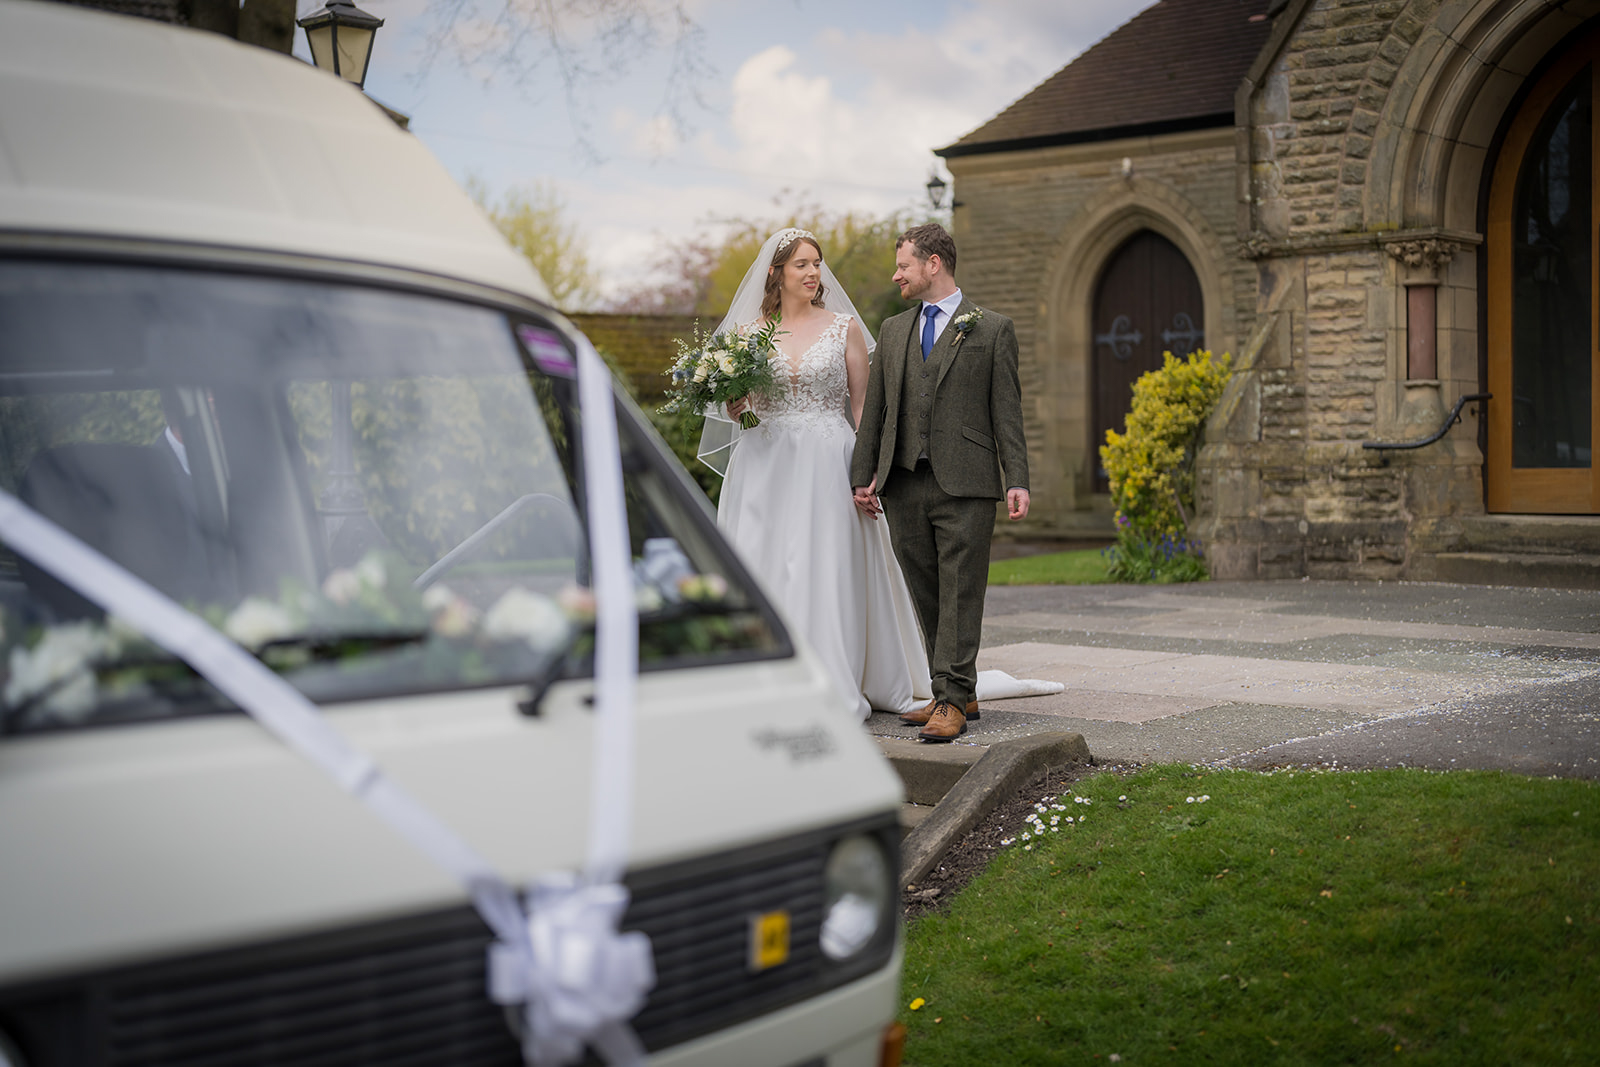 Cheshire Wedding Photographer & Videographer - Visit Us Today!